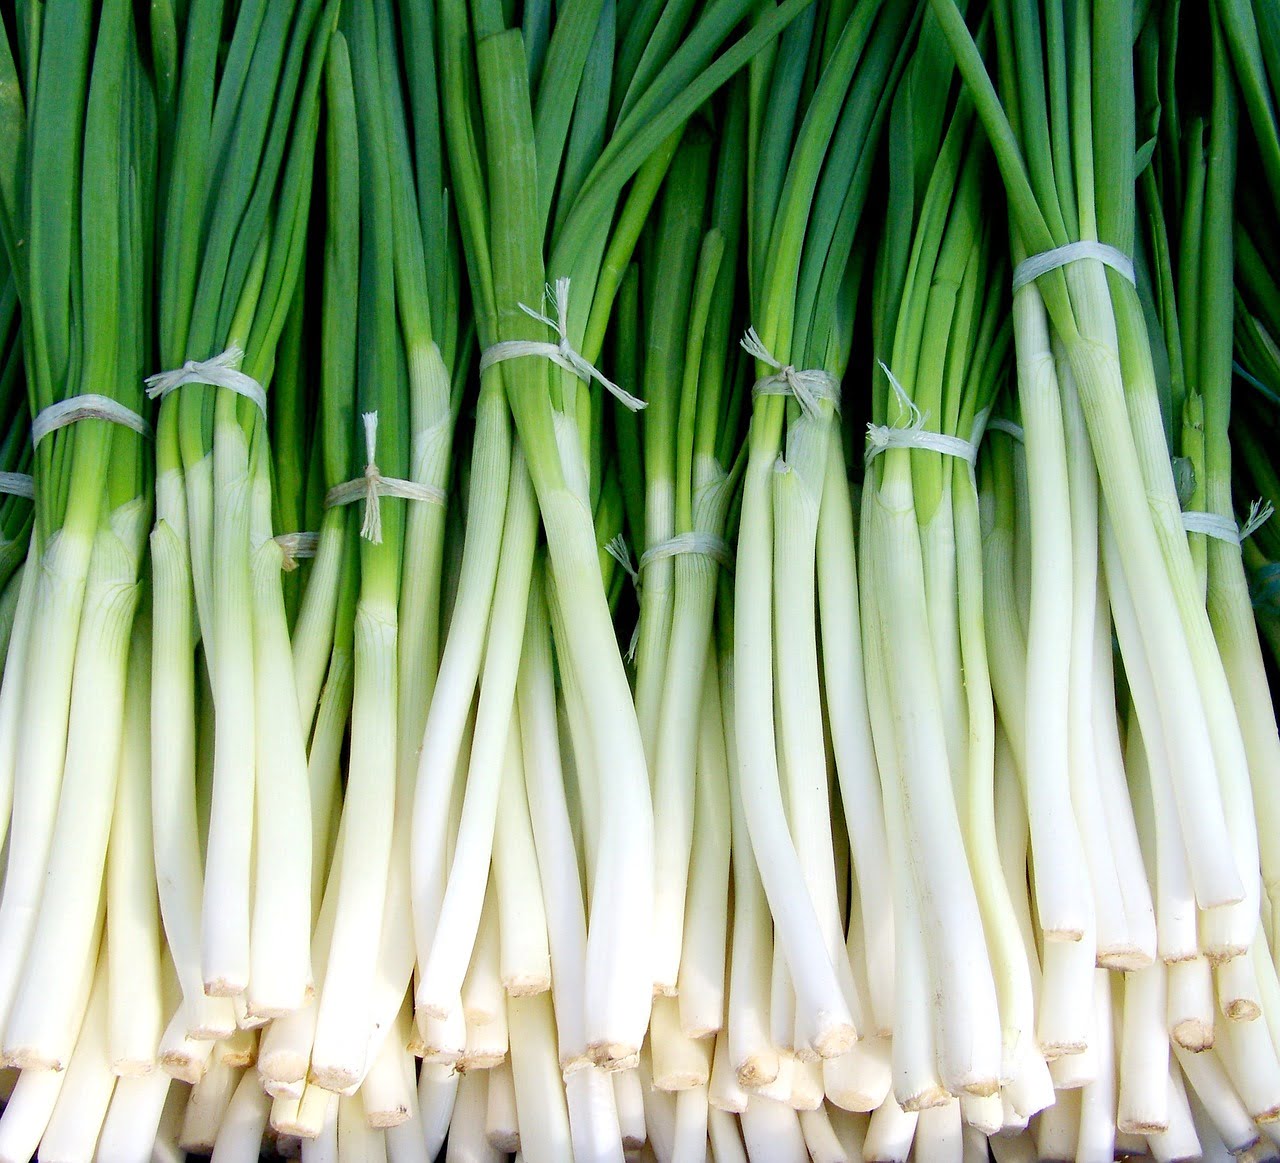 how to cut green onions